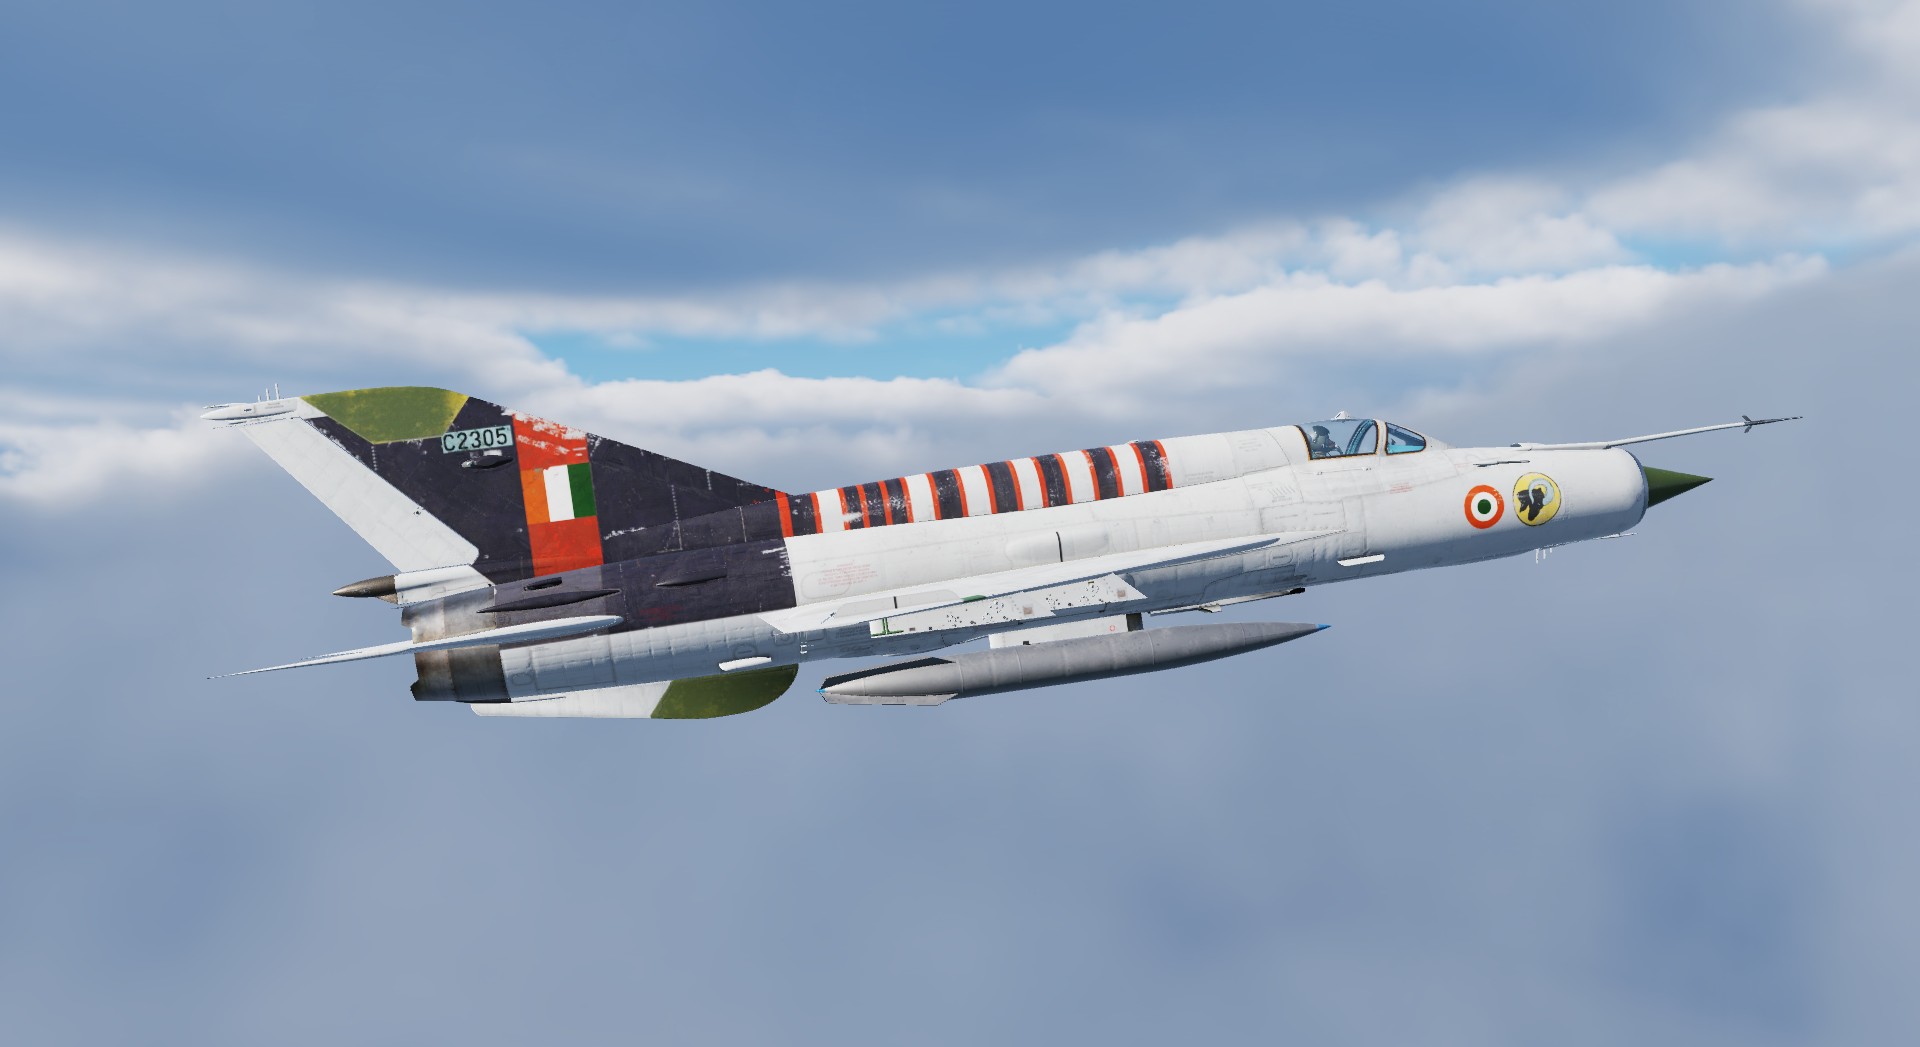 Mig 21bis "Oorials" Skin for Indian Air Force